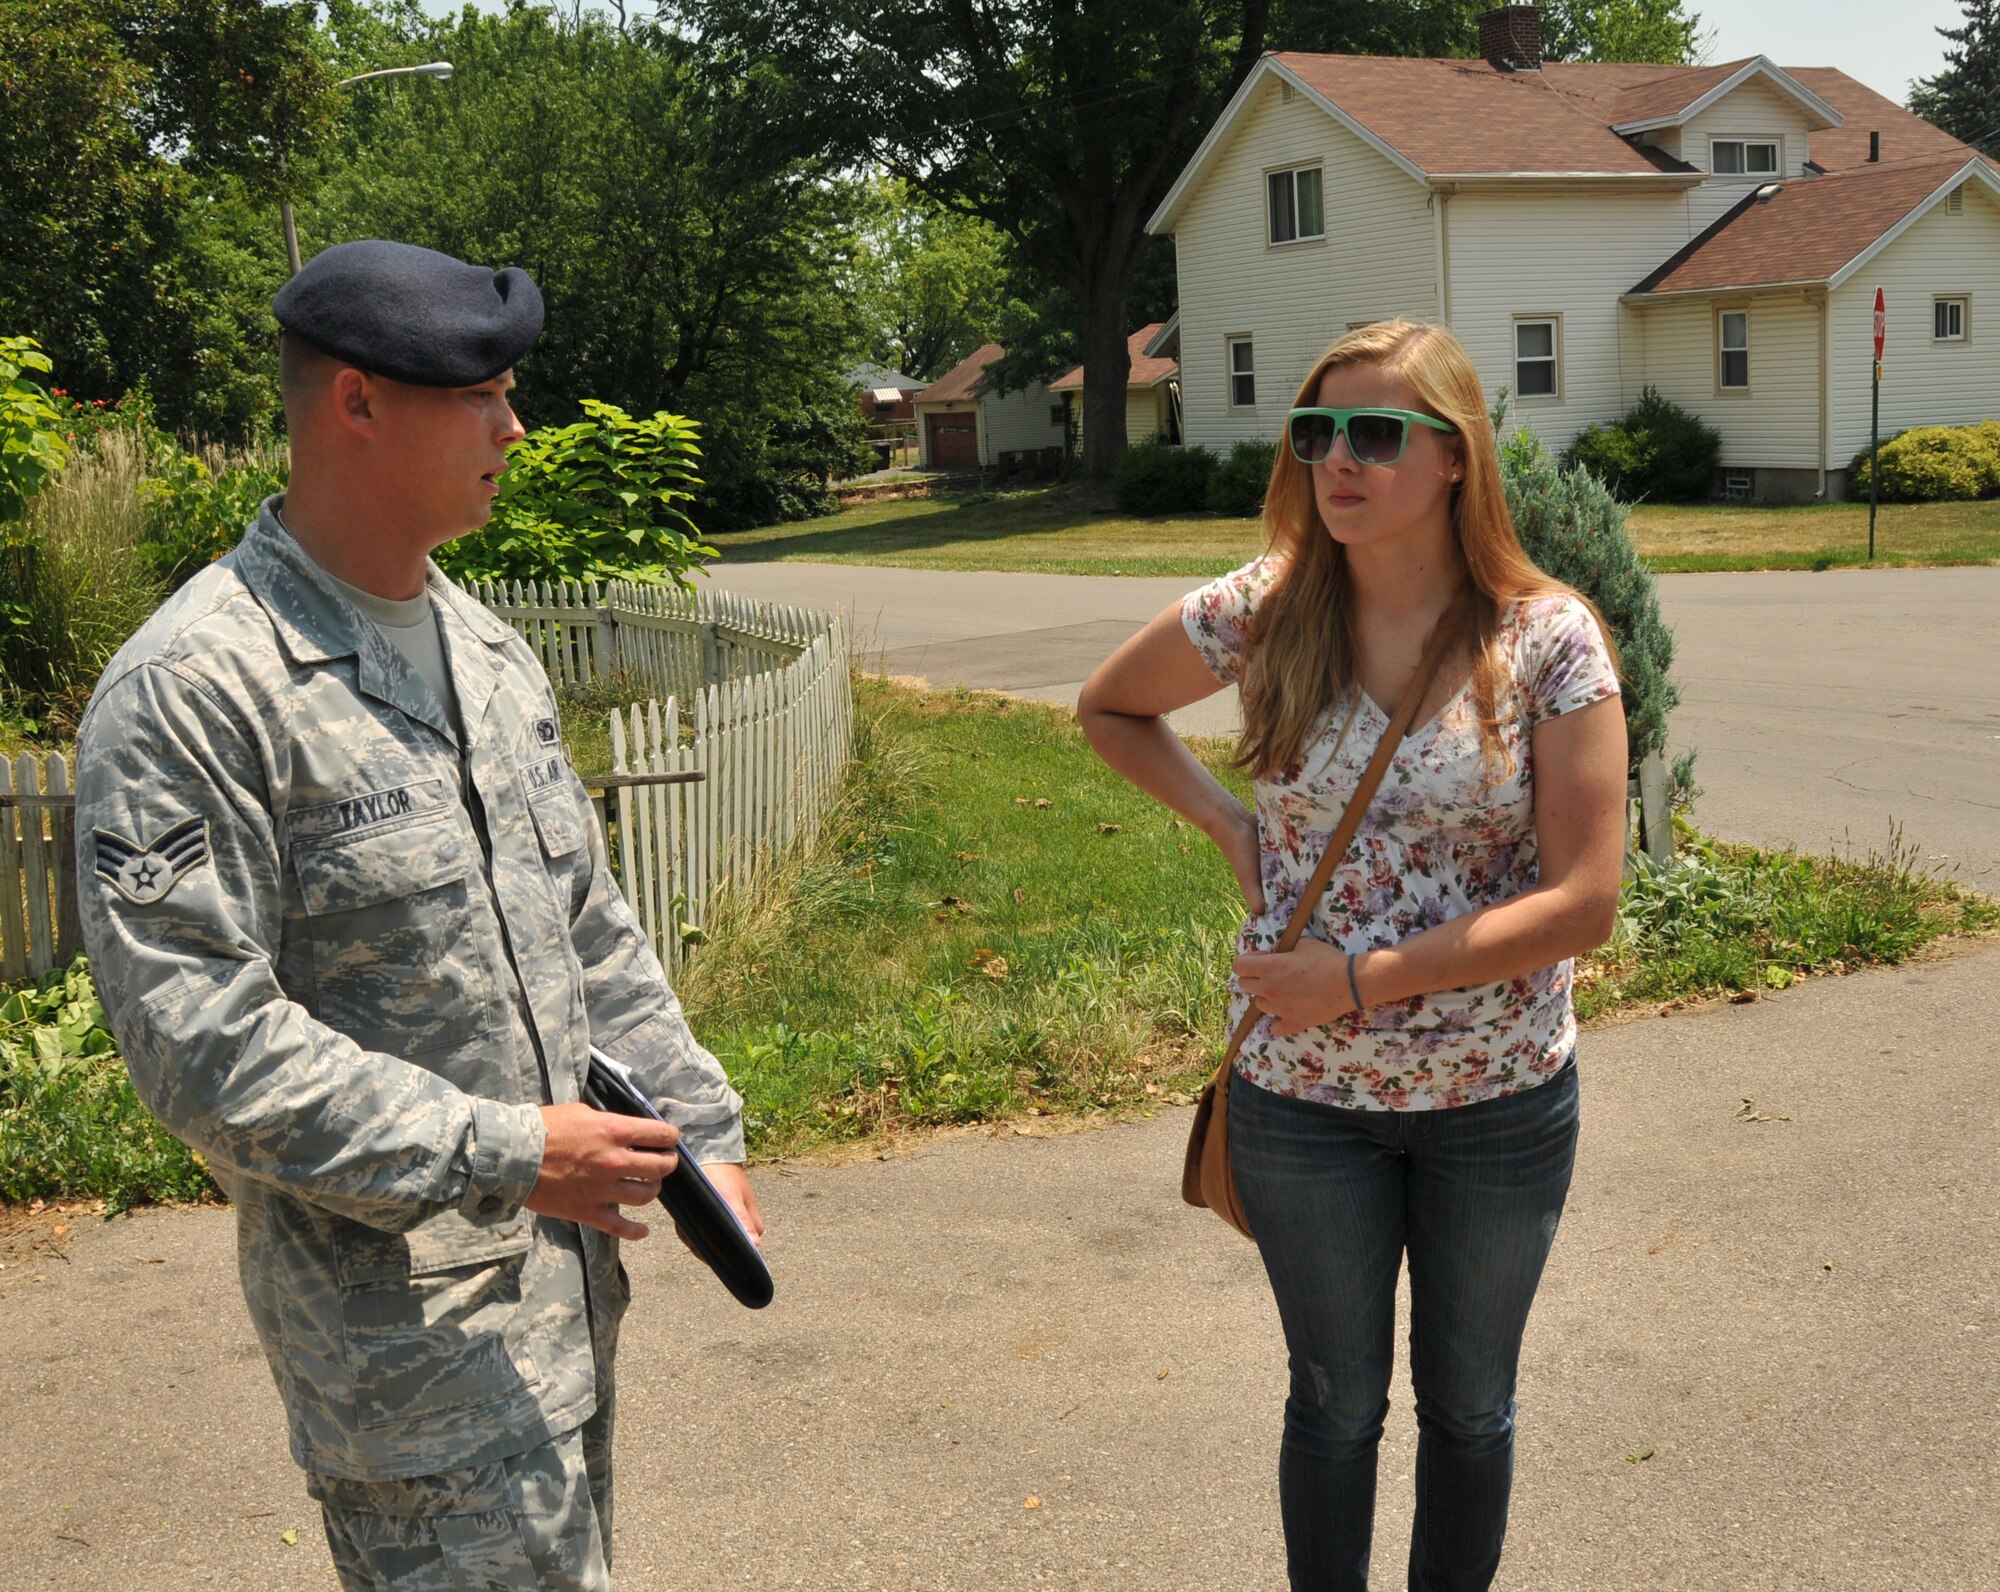 Senior Airman Jeremiah Taylor, 178th Security Forces Squadron , Ohio Air National Guard, checks on the health and welfare of residents in Montgomery County, Ohio June 2, 2012 in response to recent storm damages. The storm left thousands without power and Ohio Governor John Kasich declared a state of emergency calling upon the Ohio Air and Army National Guard to assist those in need.